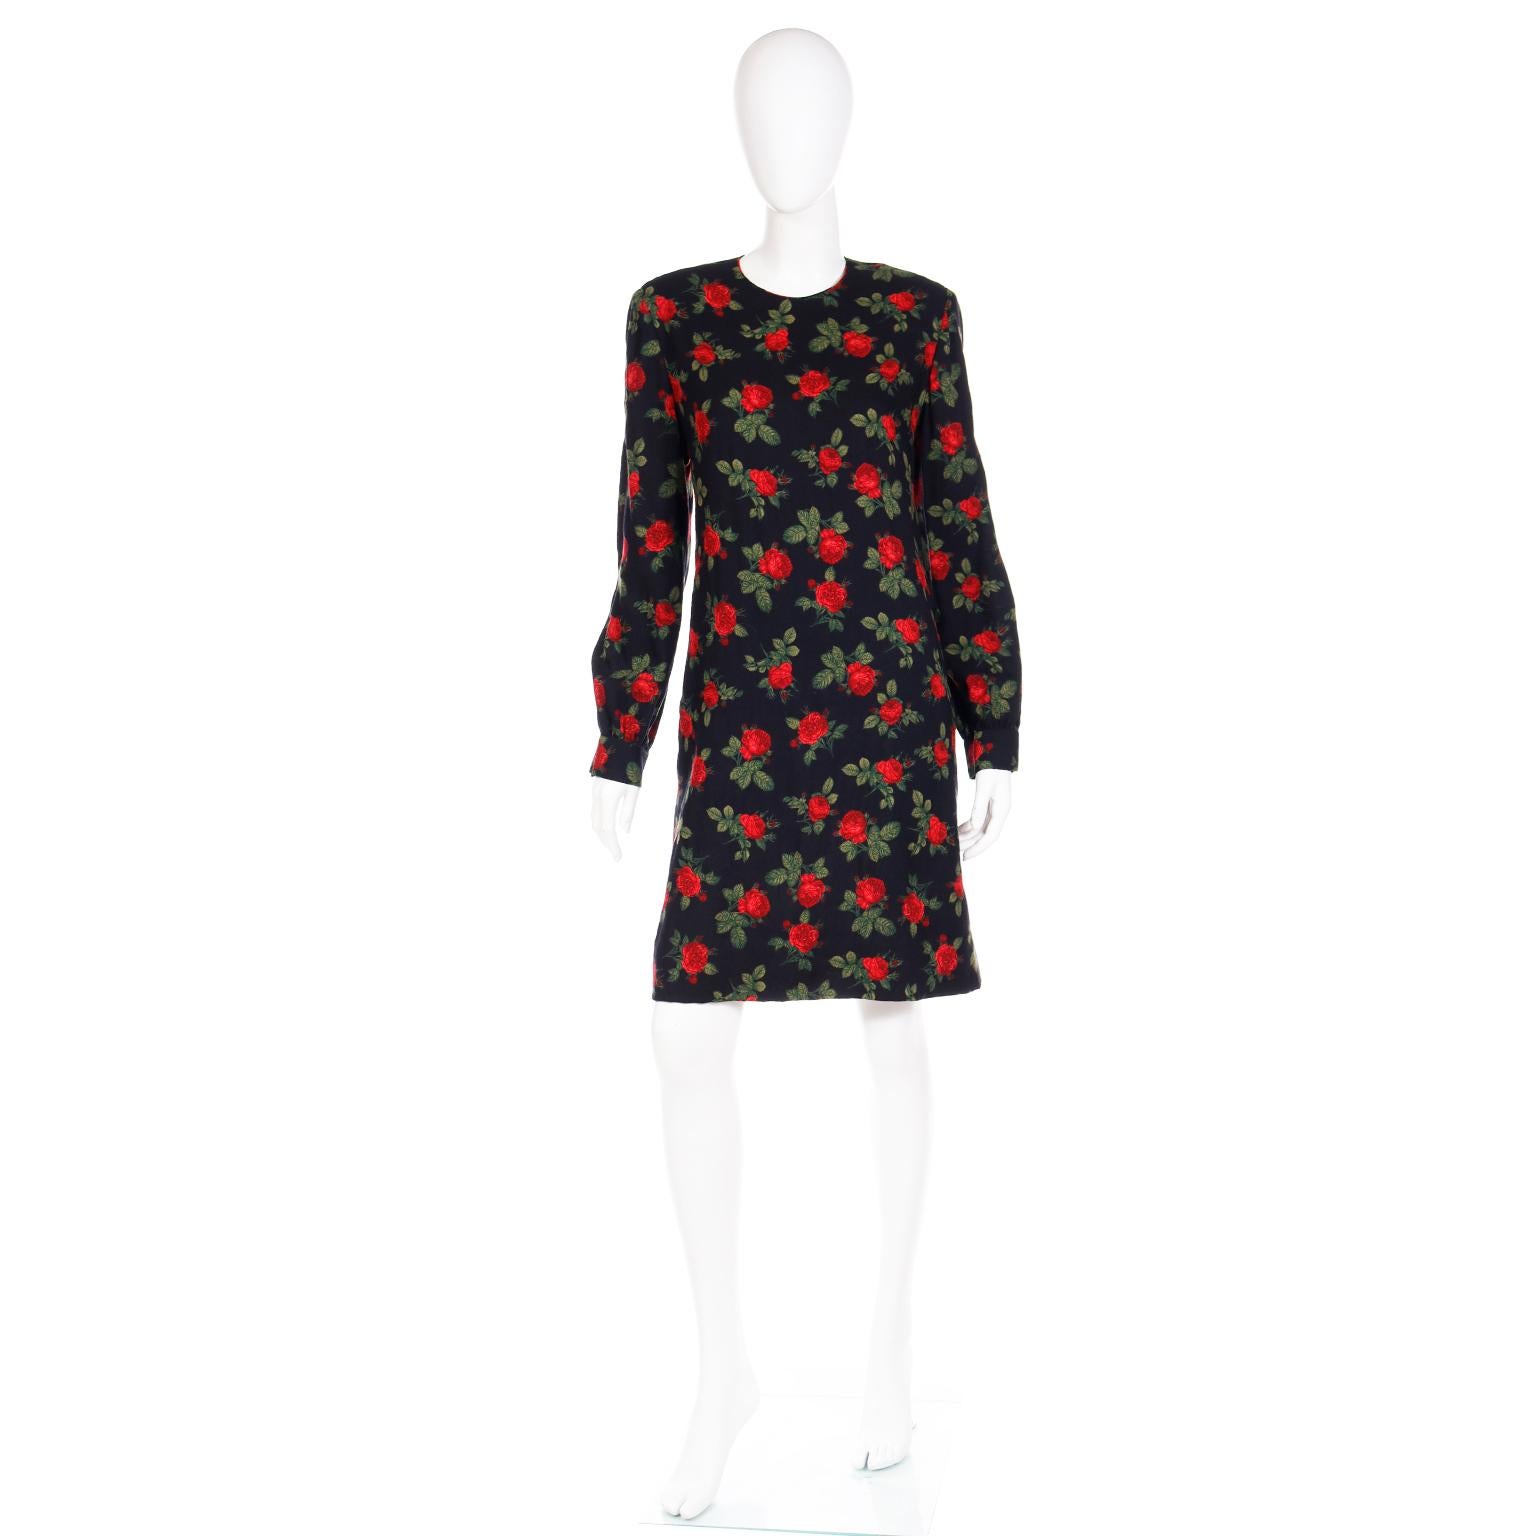 This vintage Lihli wool long sleeve shift dress is so reminiscent of Dolce & Gabbana with its bold red rose print. We often find Lihli dresses at our better estates and this one came from an estate of incredible vintage designer clothing and